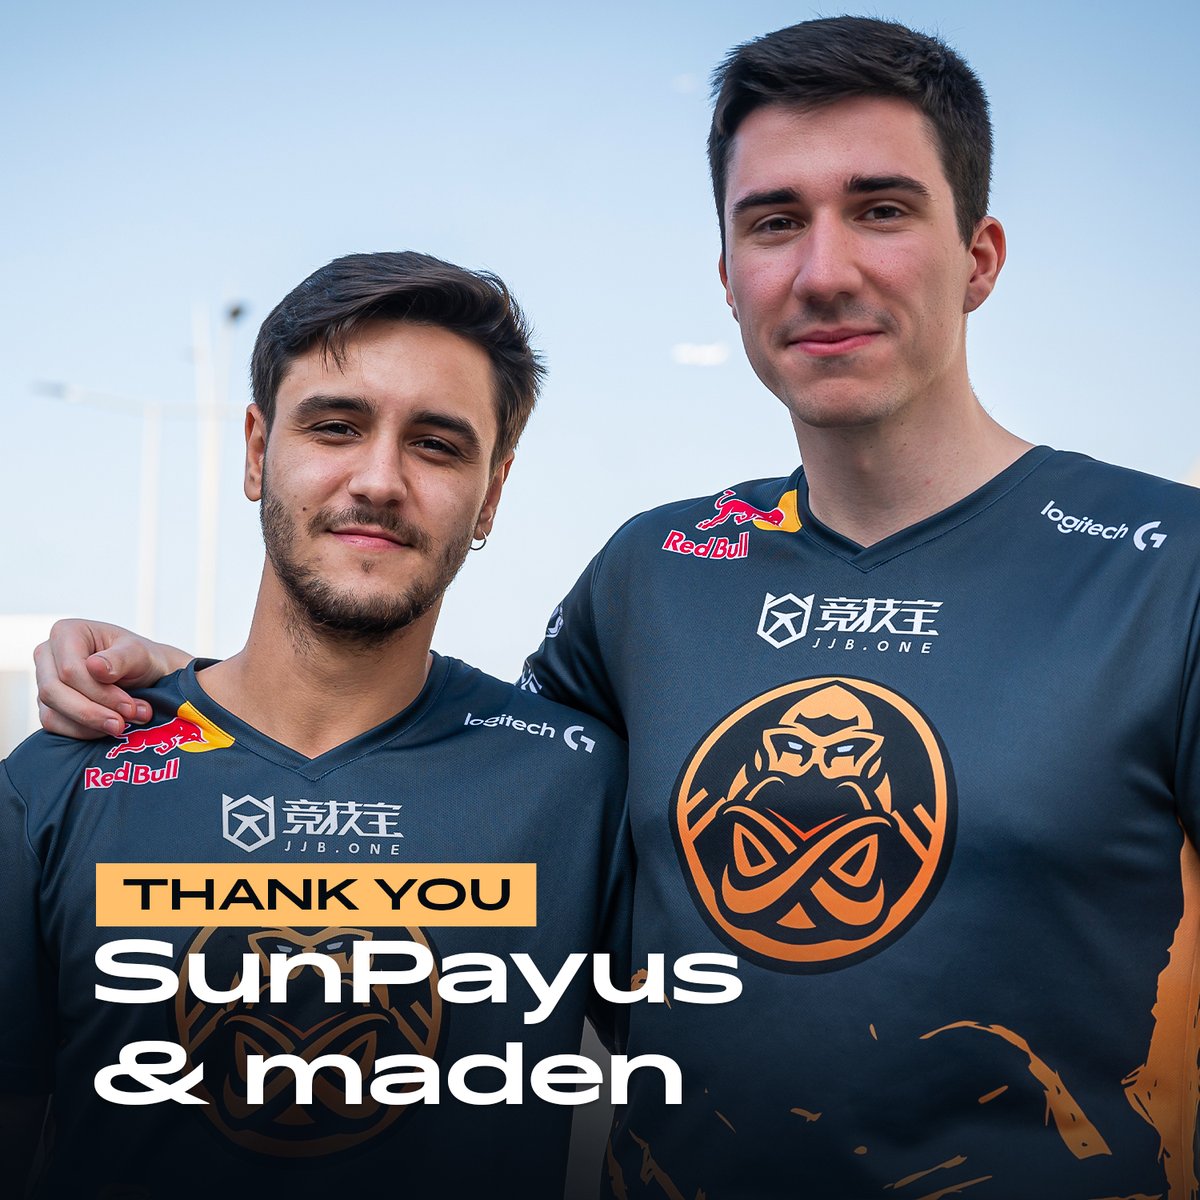 Thank you and farewell, @SunPayuscsgo & @madennCS 🧡 SunPayus’s contract has been bought out by another organization. With his contract ending, maden has chosen to move on from ENCE.